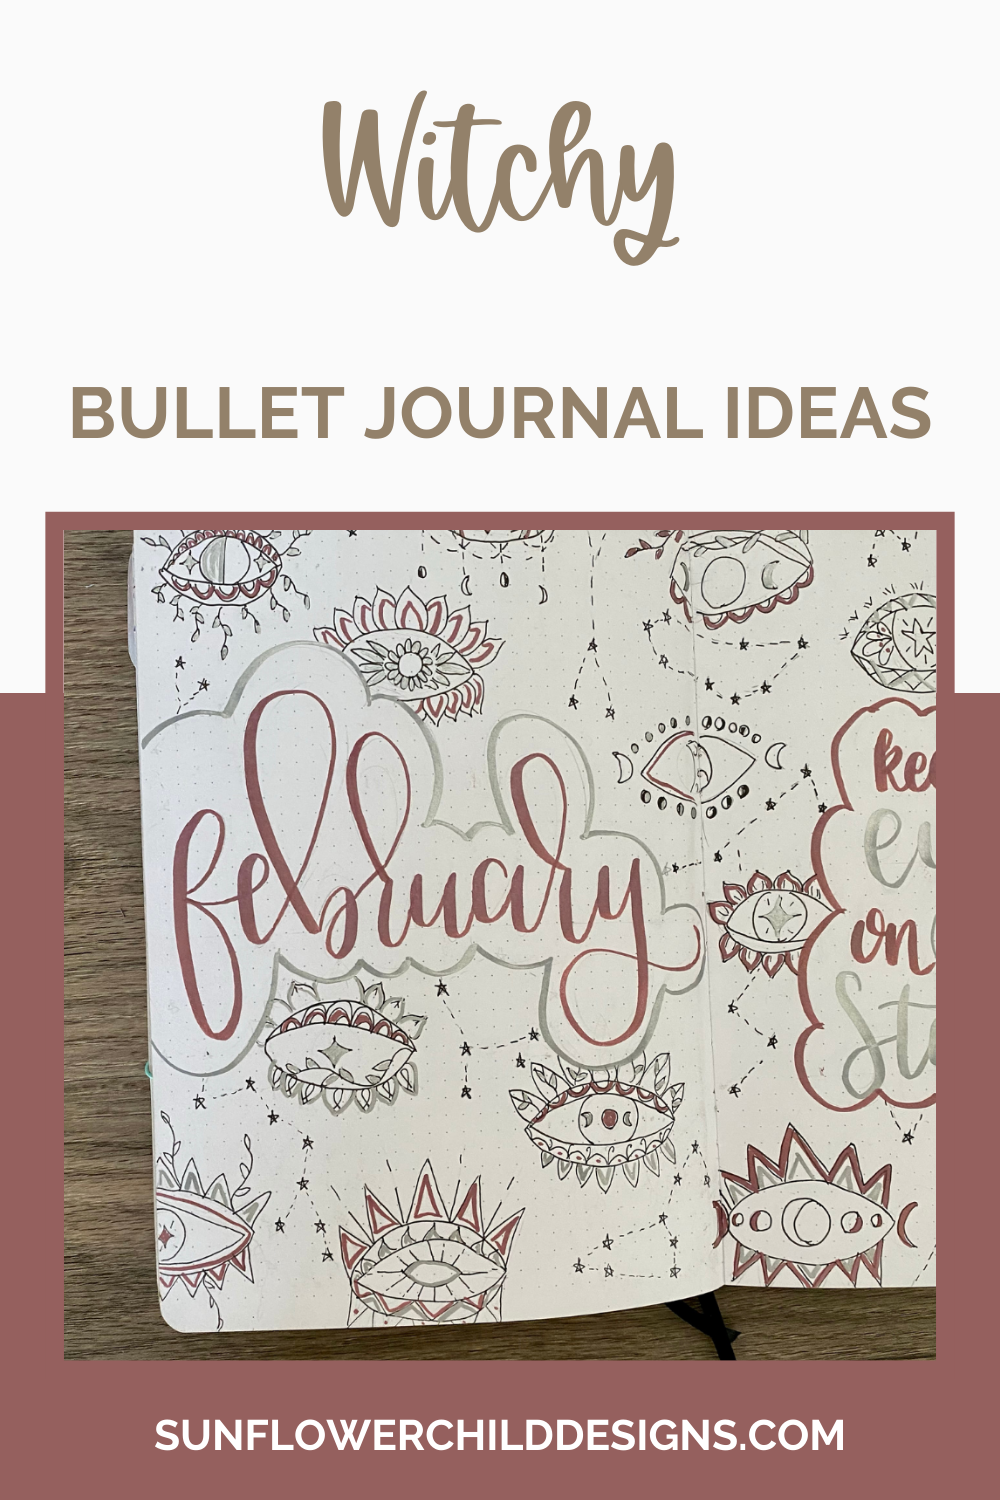 witchy-bullet-journal-ideas-february-bullet-journal-ideas 6.png